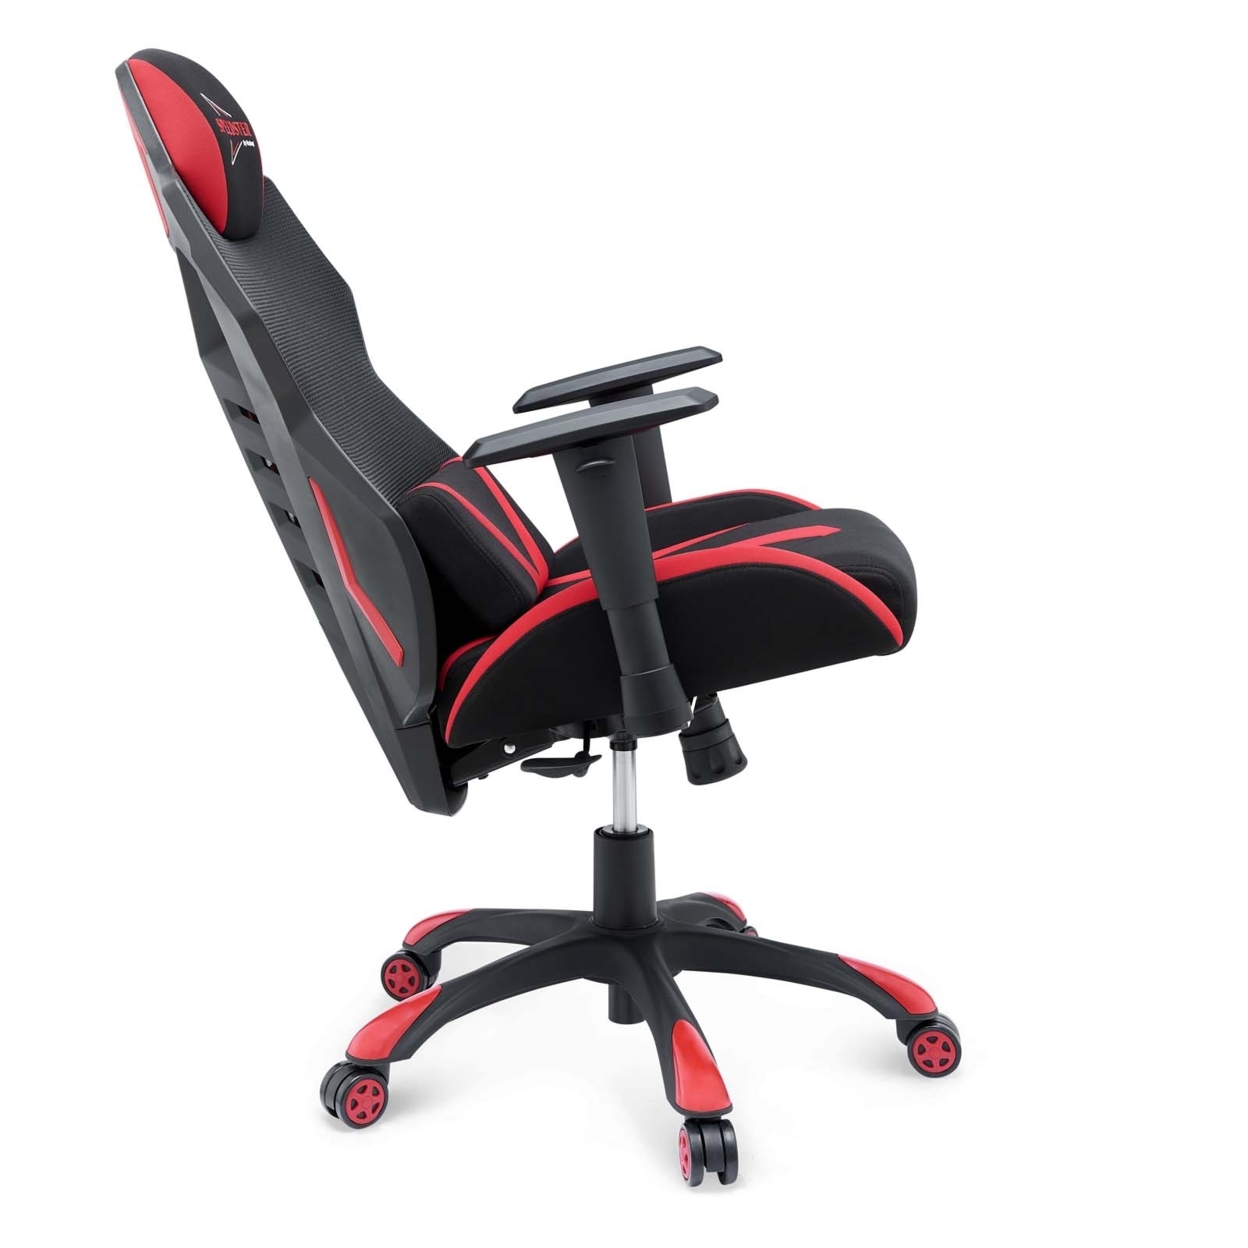 Modway Speedster Modern Mesh Fabric Gaming Computer Chair in Black/Red - image 2 of 8